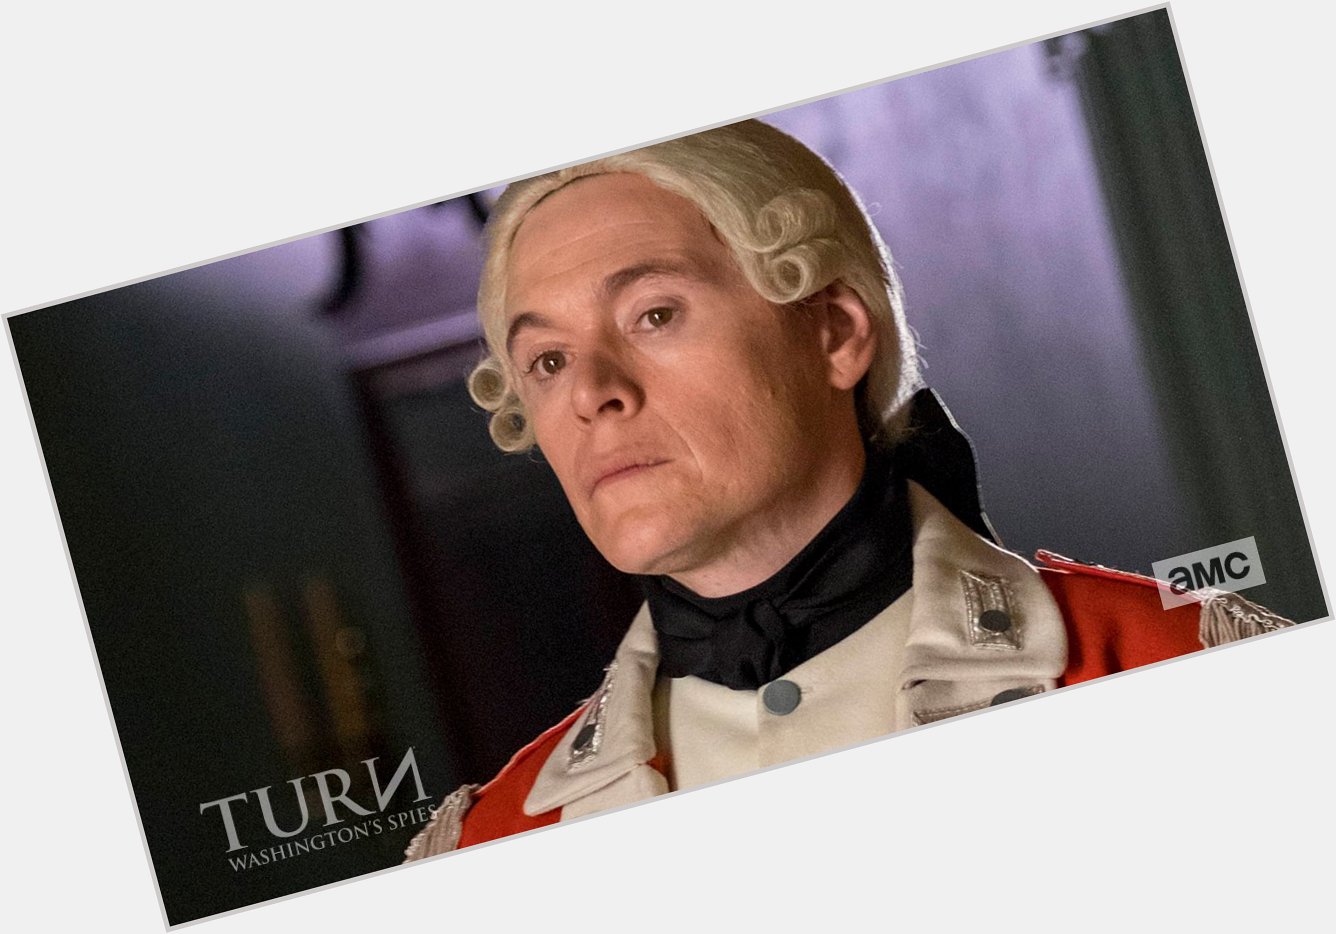 A special salute on this day to the oyster major himself! Happy birthday to Burn Gorman. 